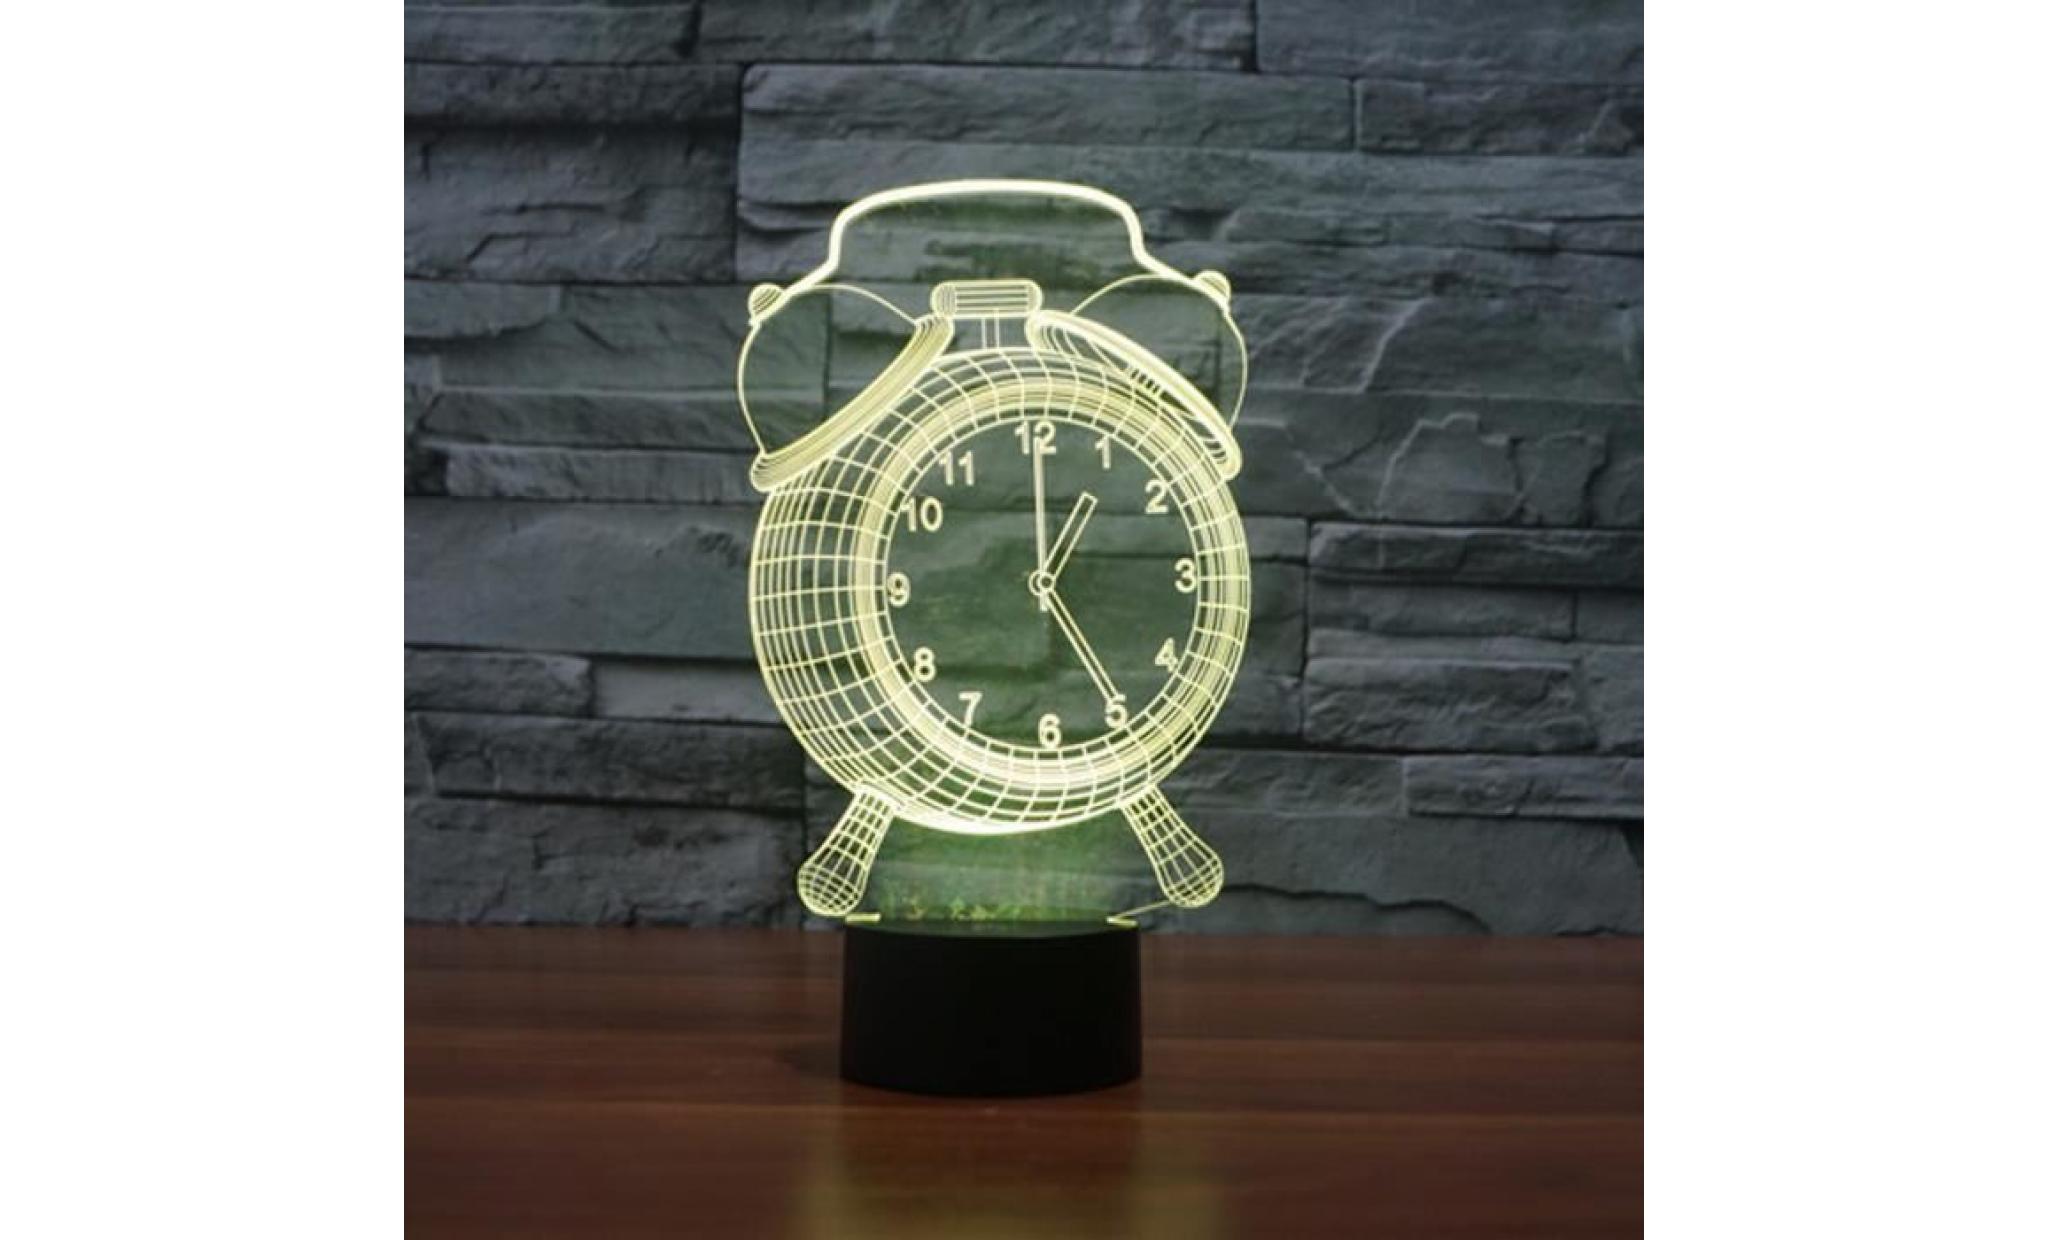 3d illusion visual night light 7 colors change led desk lamp bedroom home decor pageare2330 pageare2330 pas cher